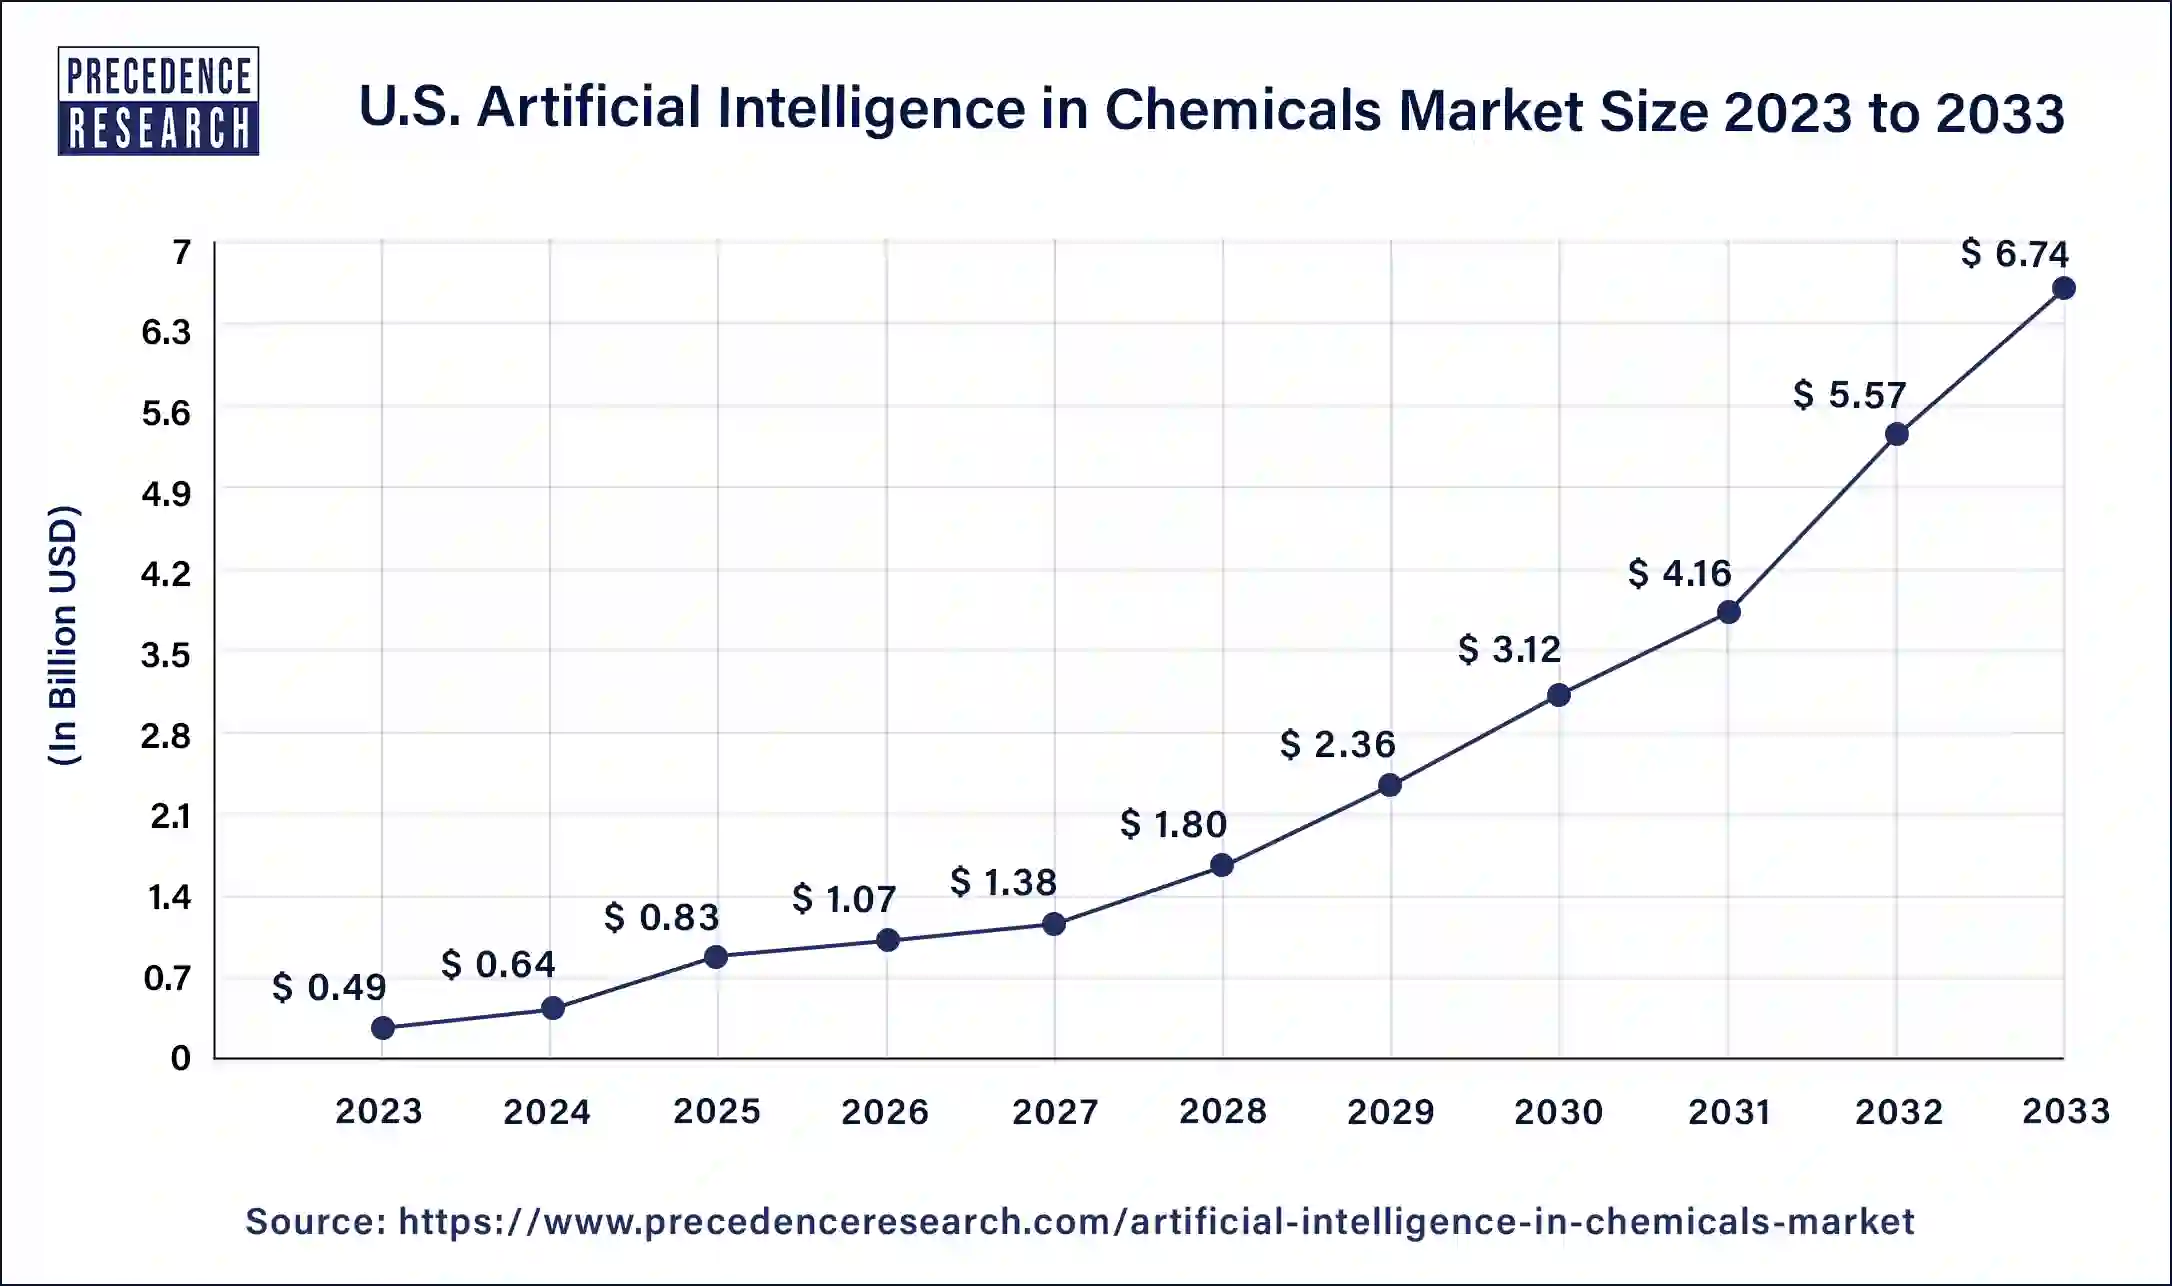 U.S. Artificial Intelligence in Chemicals Market Size 2024 To 2033